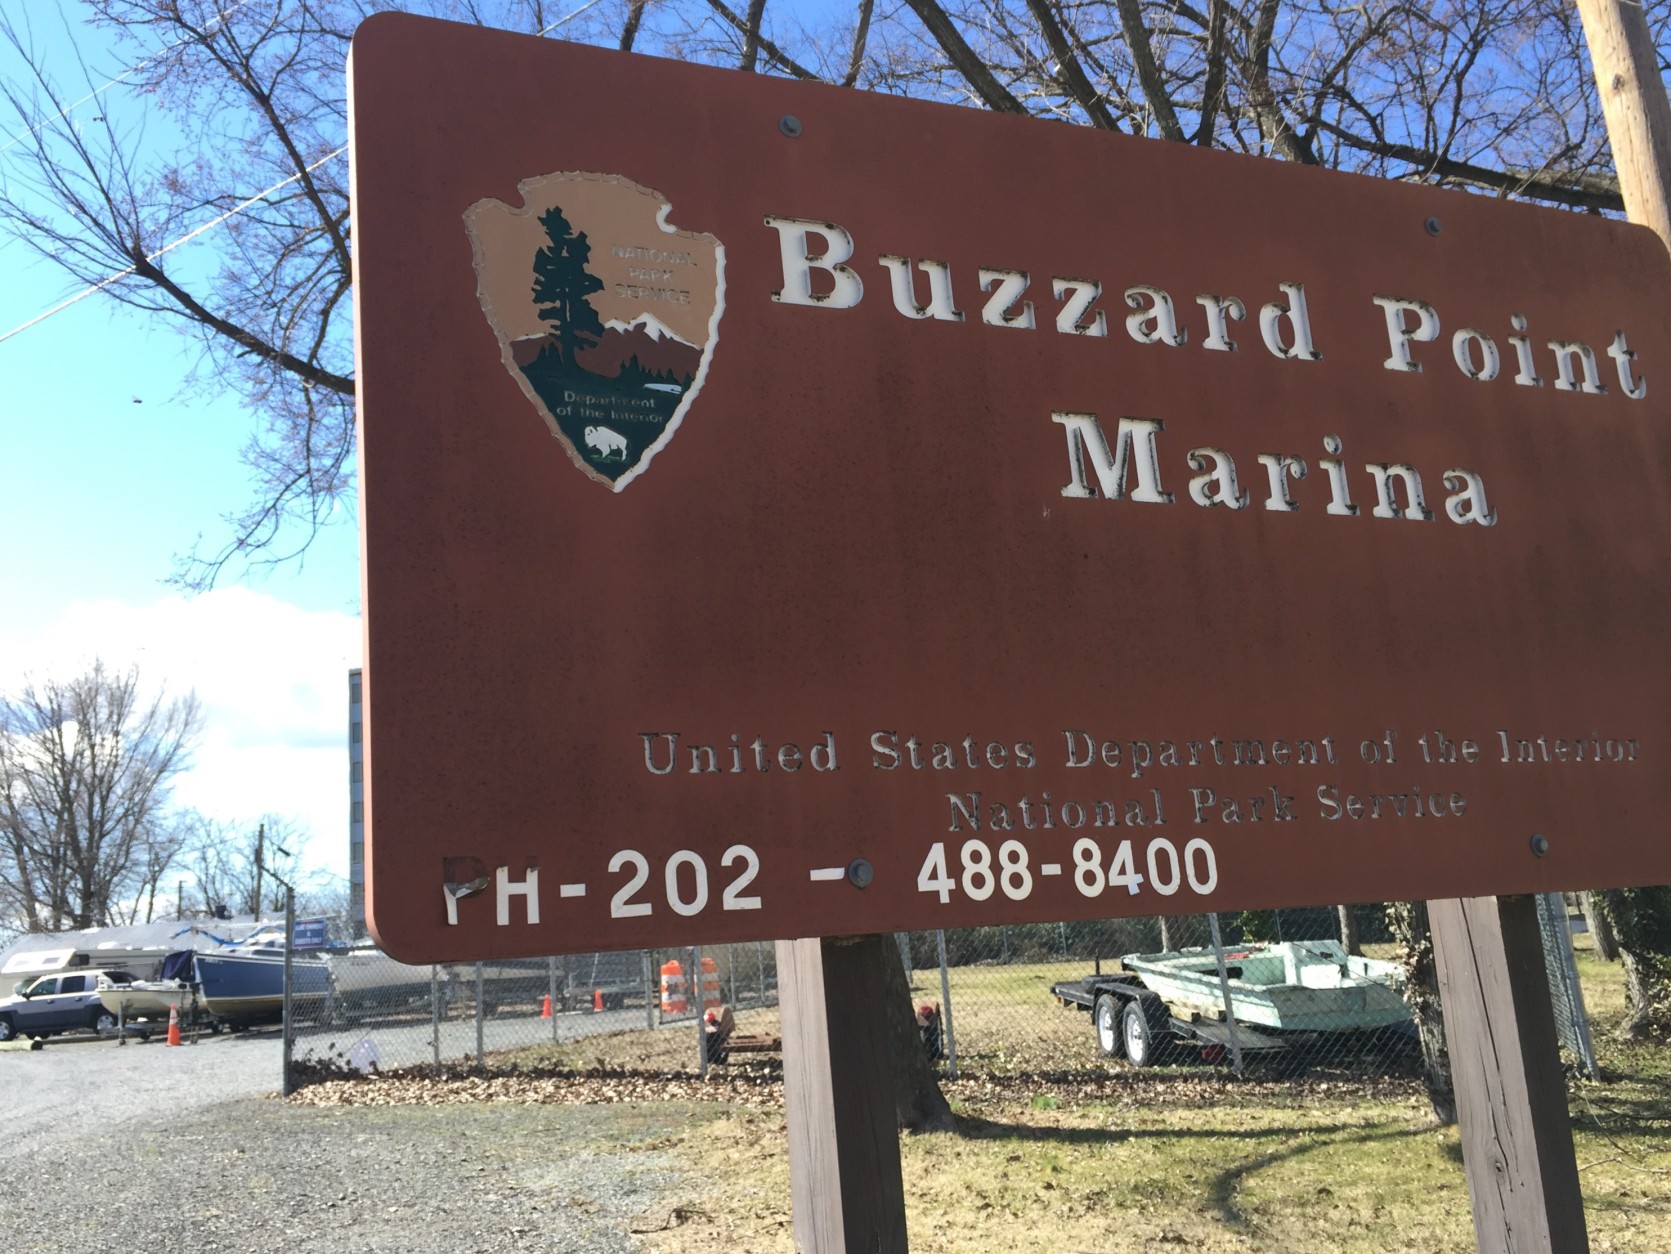 The National Park Service intends to redevelop for public use the park where Buzzard Point Marina has stood since the 1950's. Public hearings for impute from interested parties begin this spring. (WTOP/Kristi King)